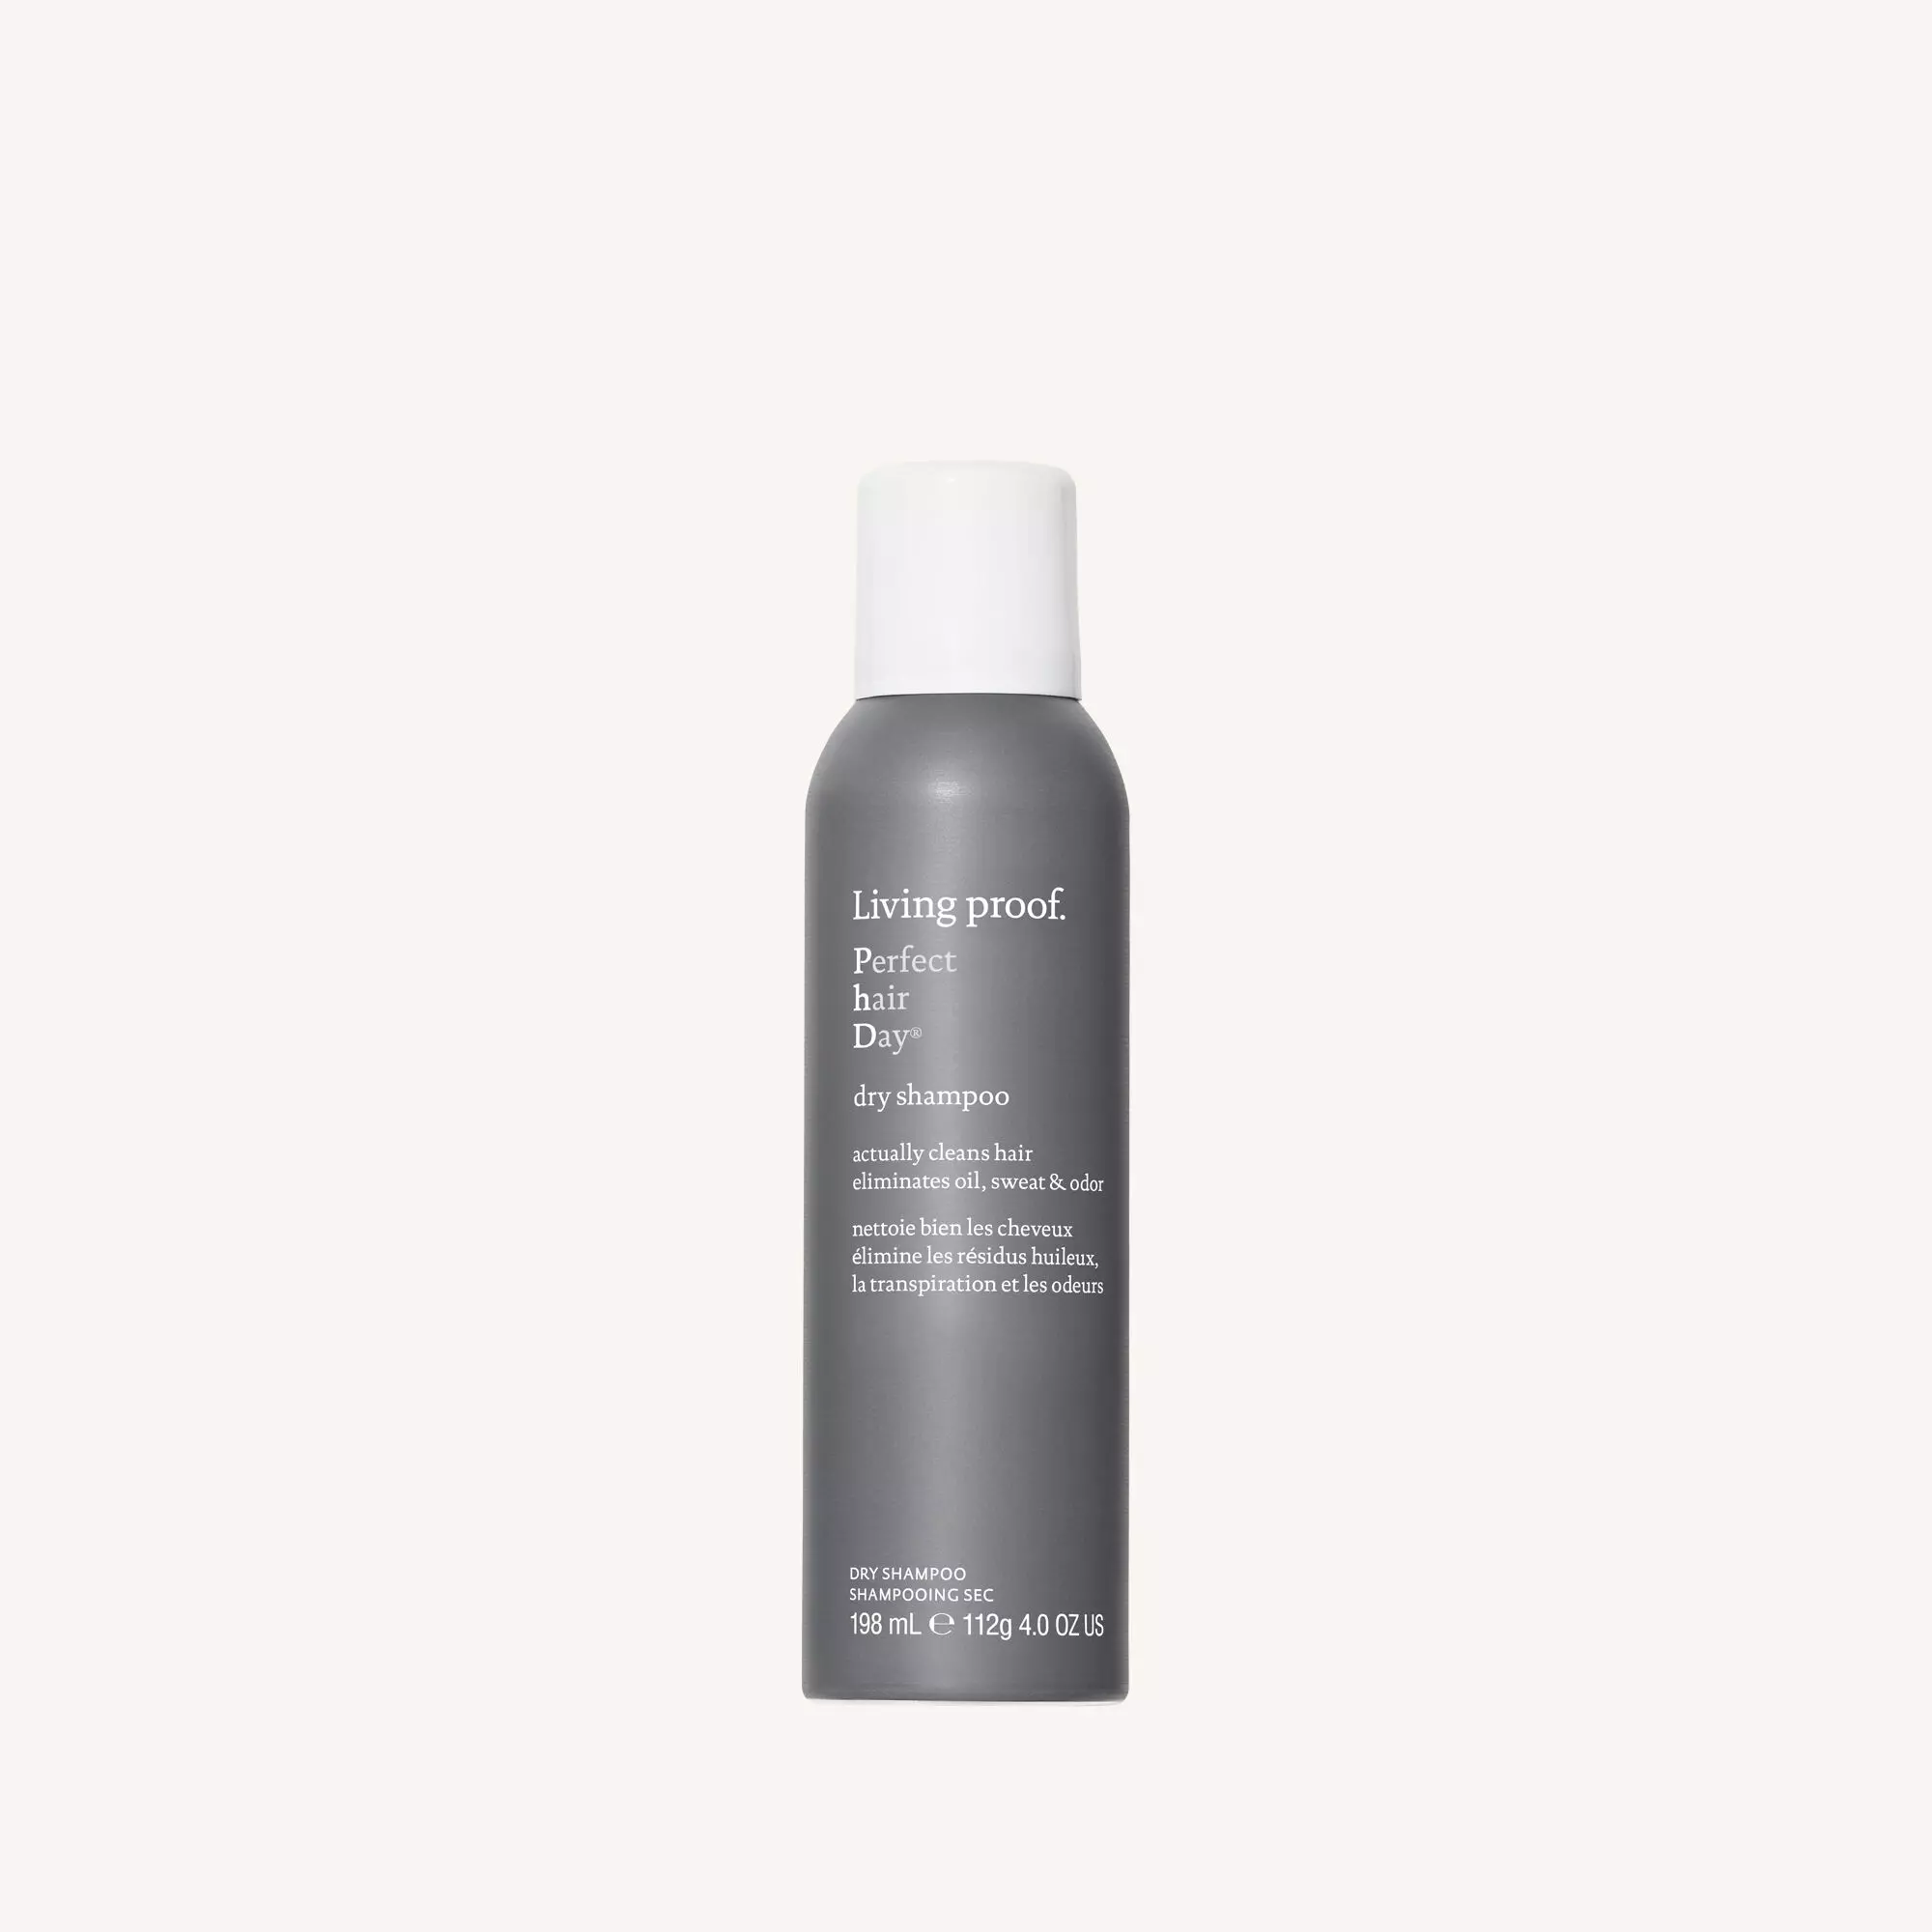 Living Proof Dry Shampoo, Perfect hair Day, Dry Shampoo for Women and Men, 4 oz